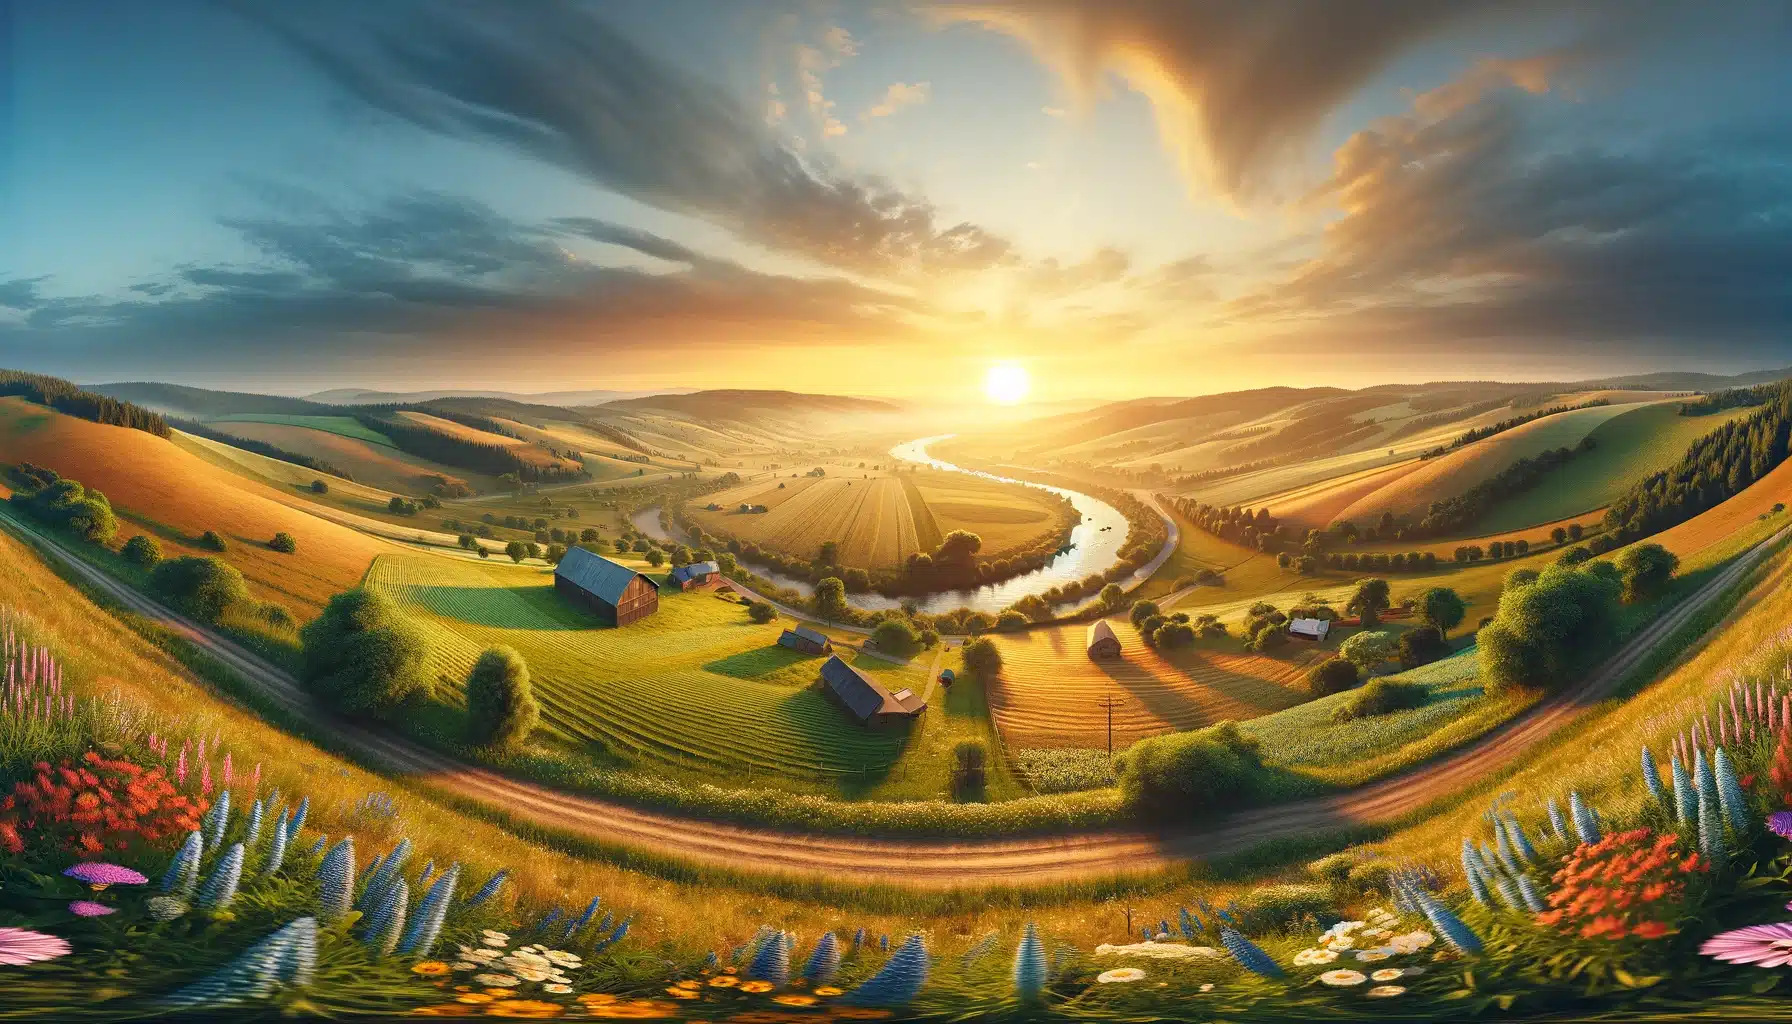 A Panoramic view of a peaceful countryside landscape at sunset, featuring rolling hills, wildflower fields, a winding river, and farmhouses.